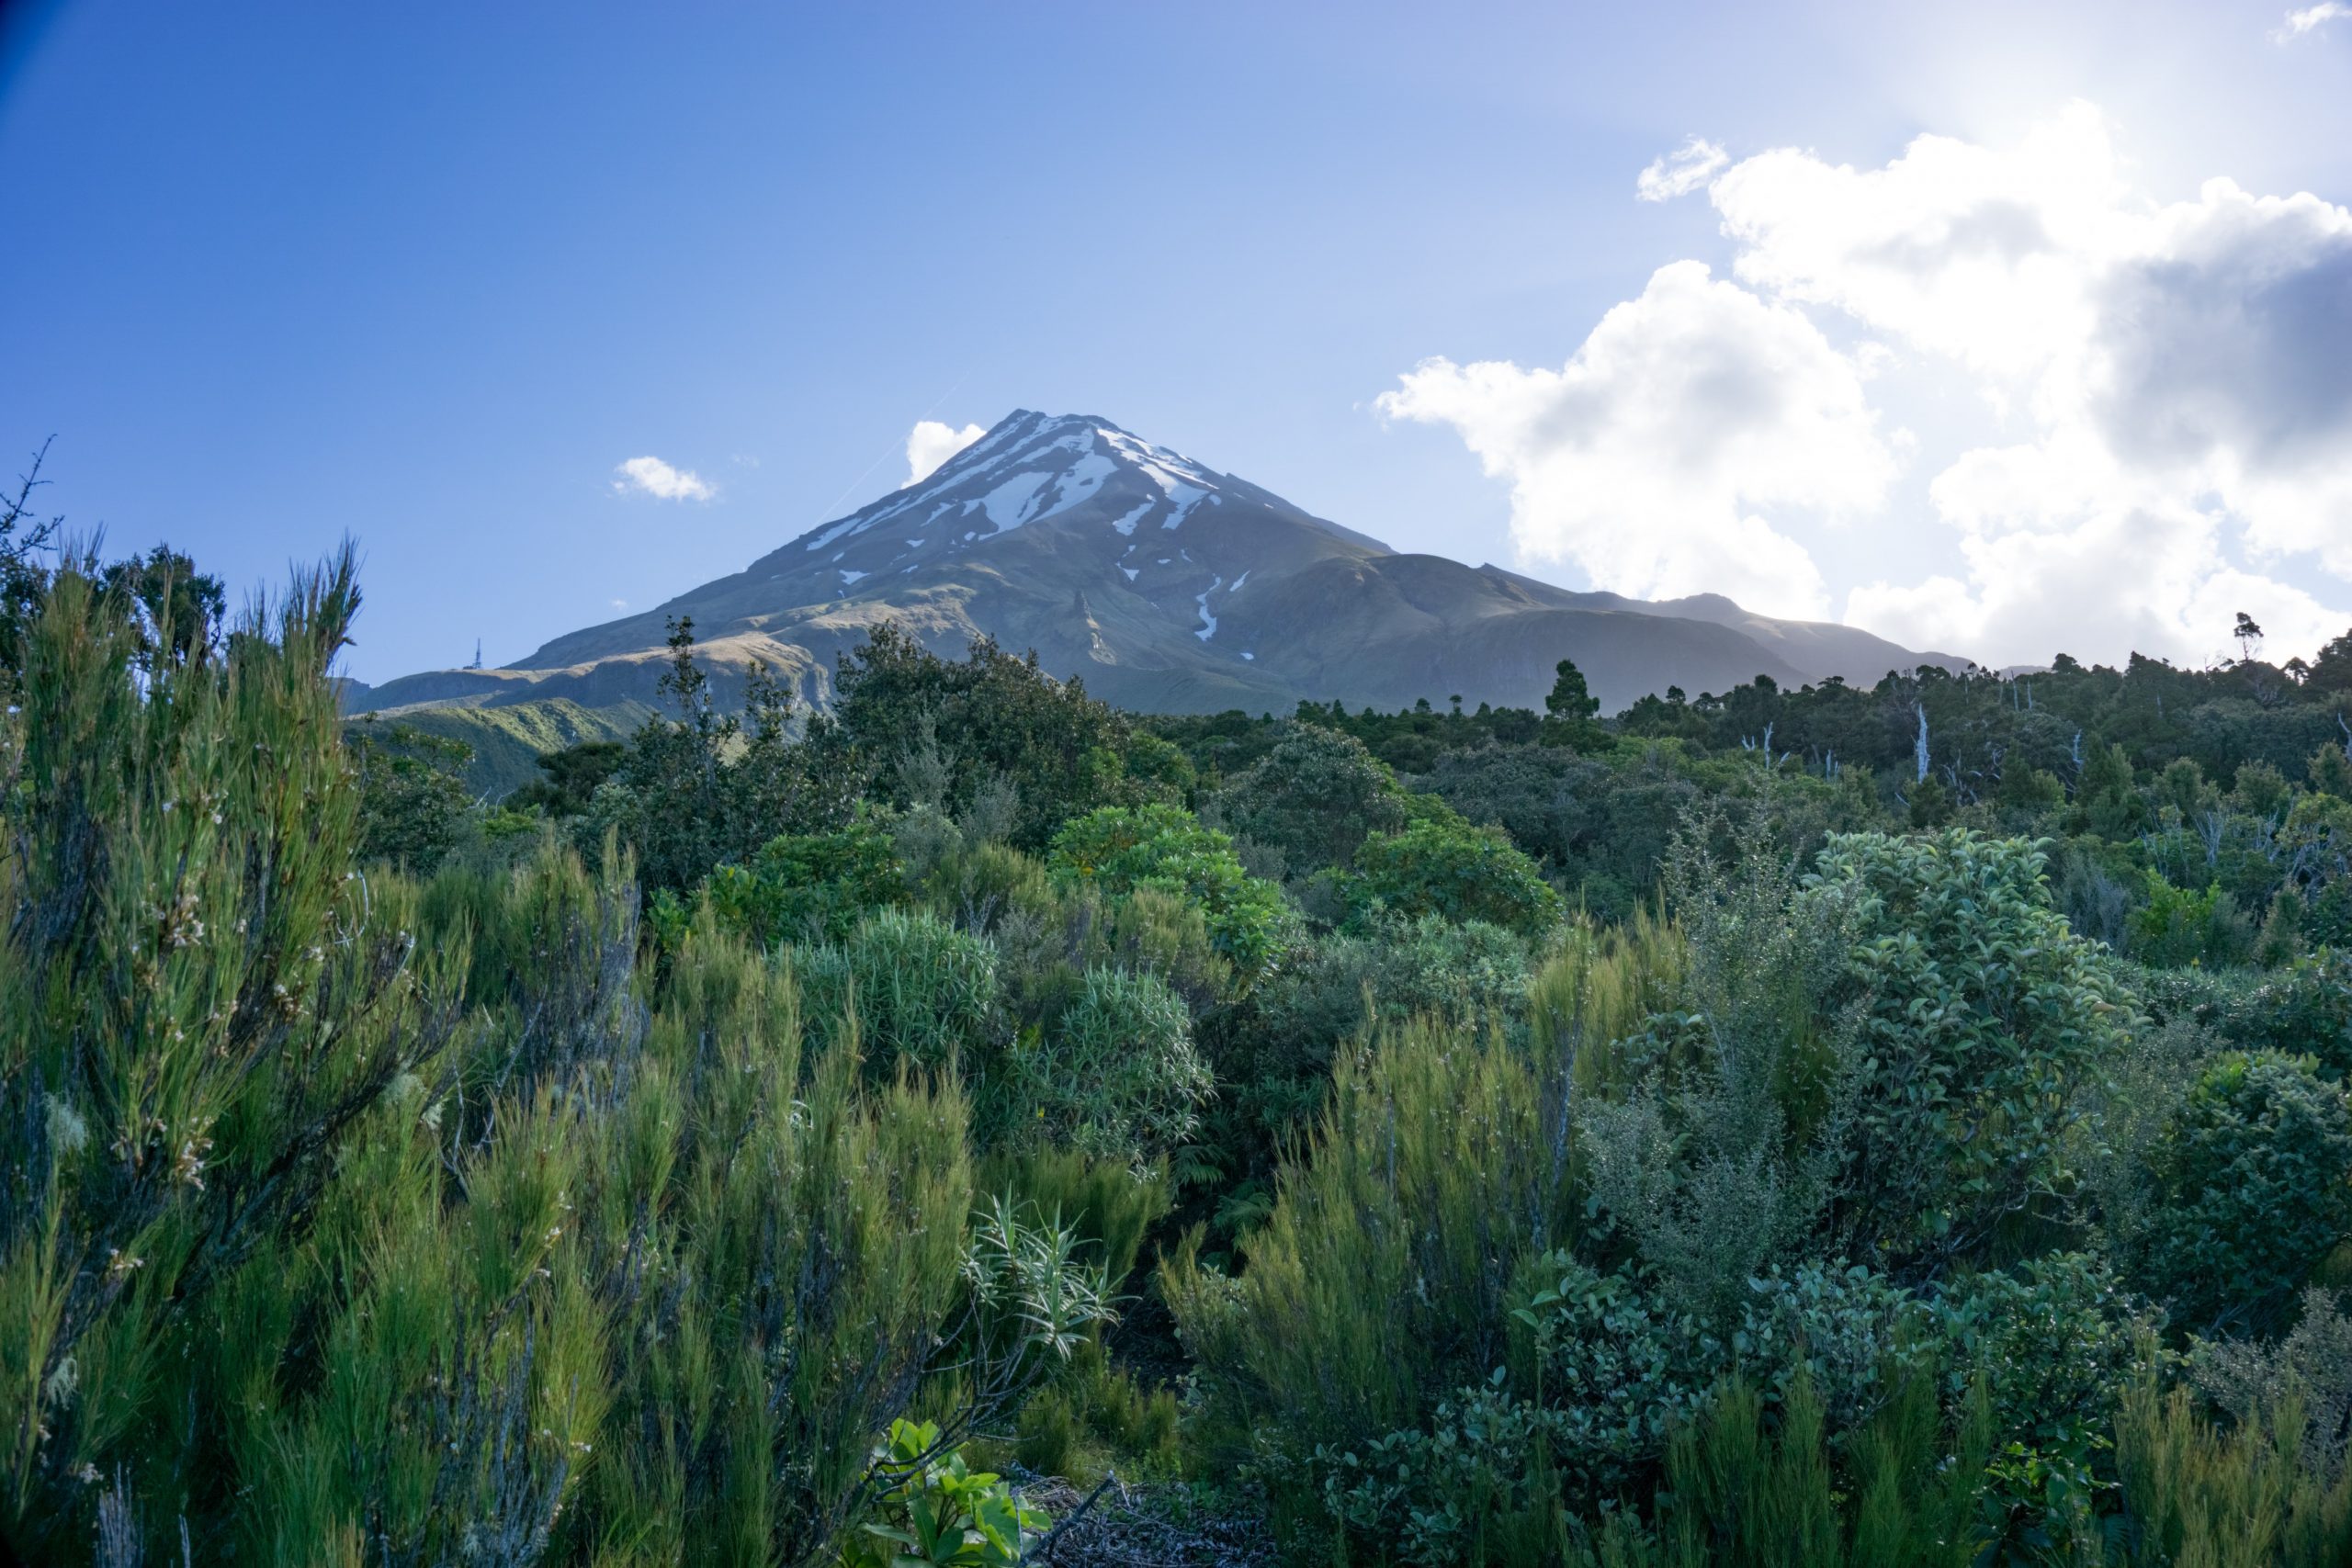 An area of green vegetation with a snow-capped mountain in the backdrop.